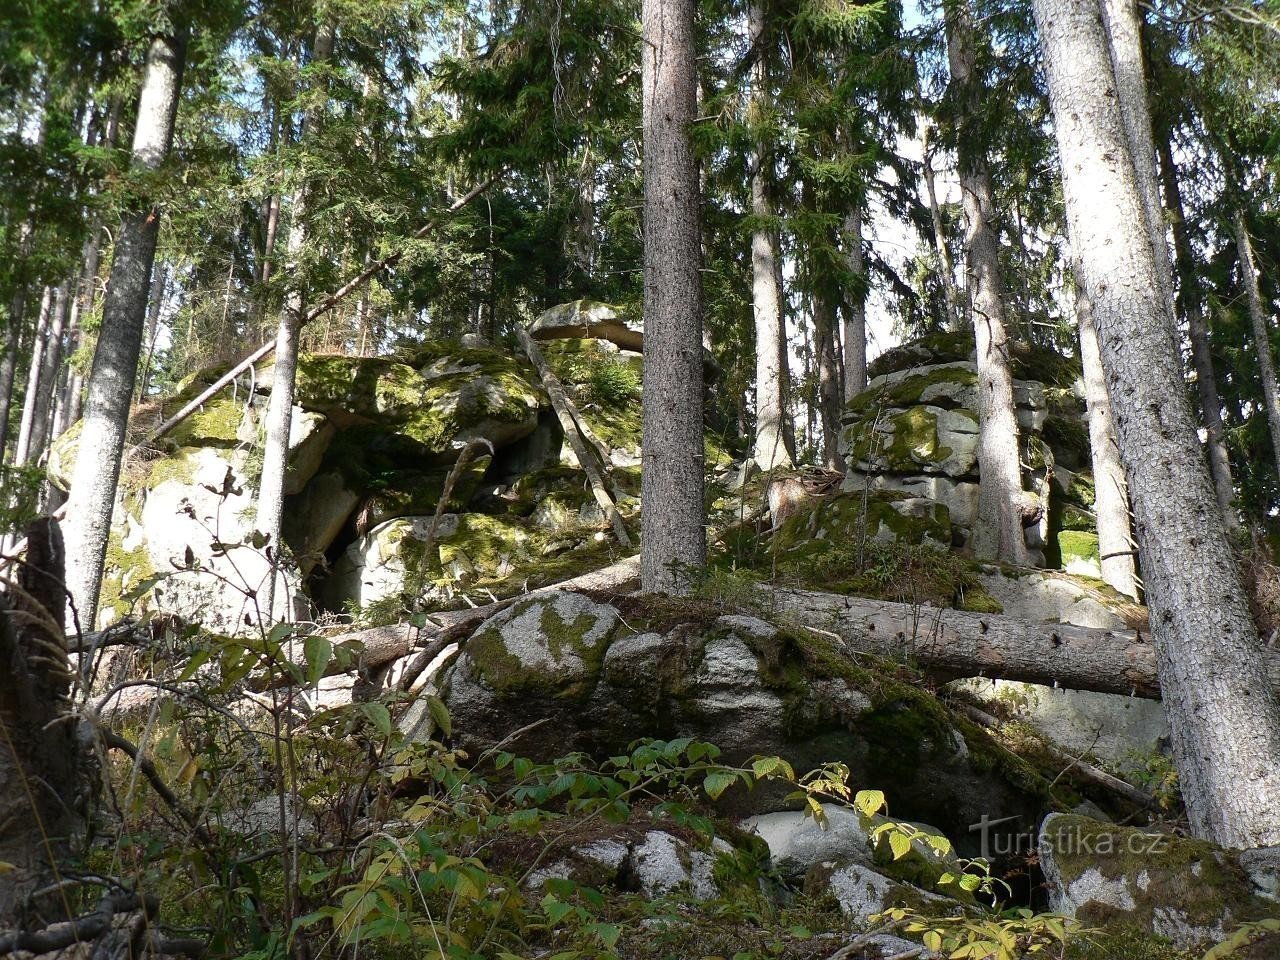 Bear trail, rocks at the beginning of the trail